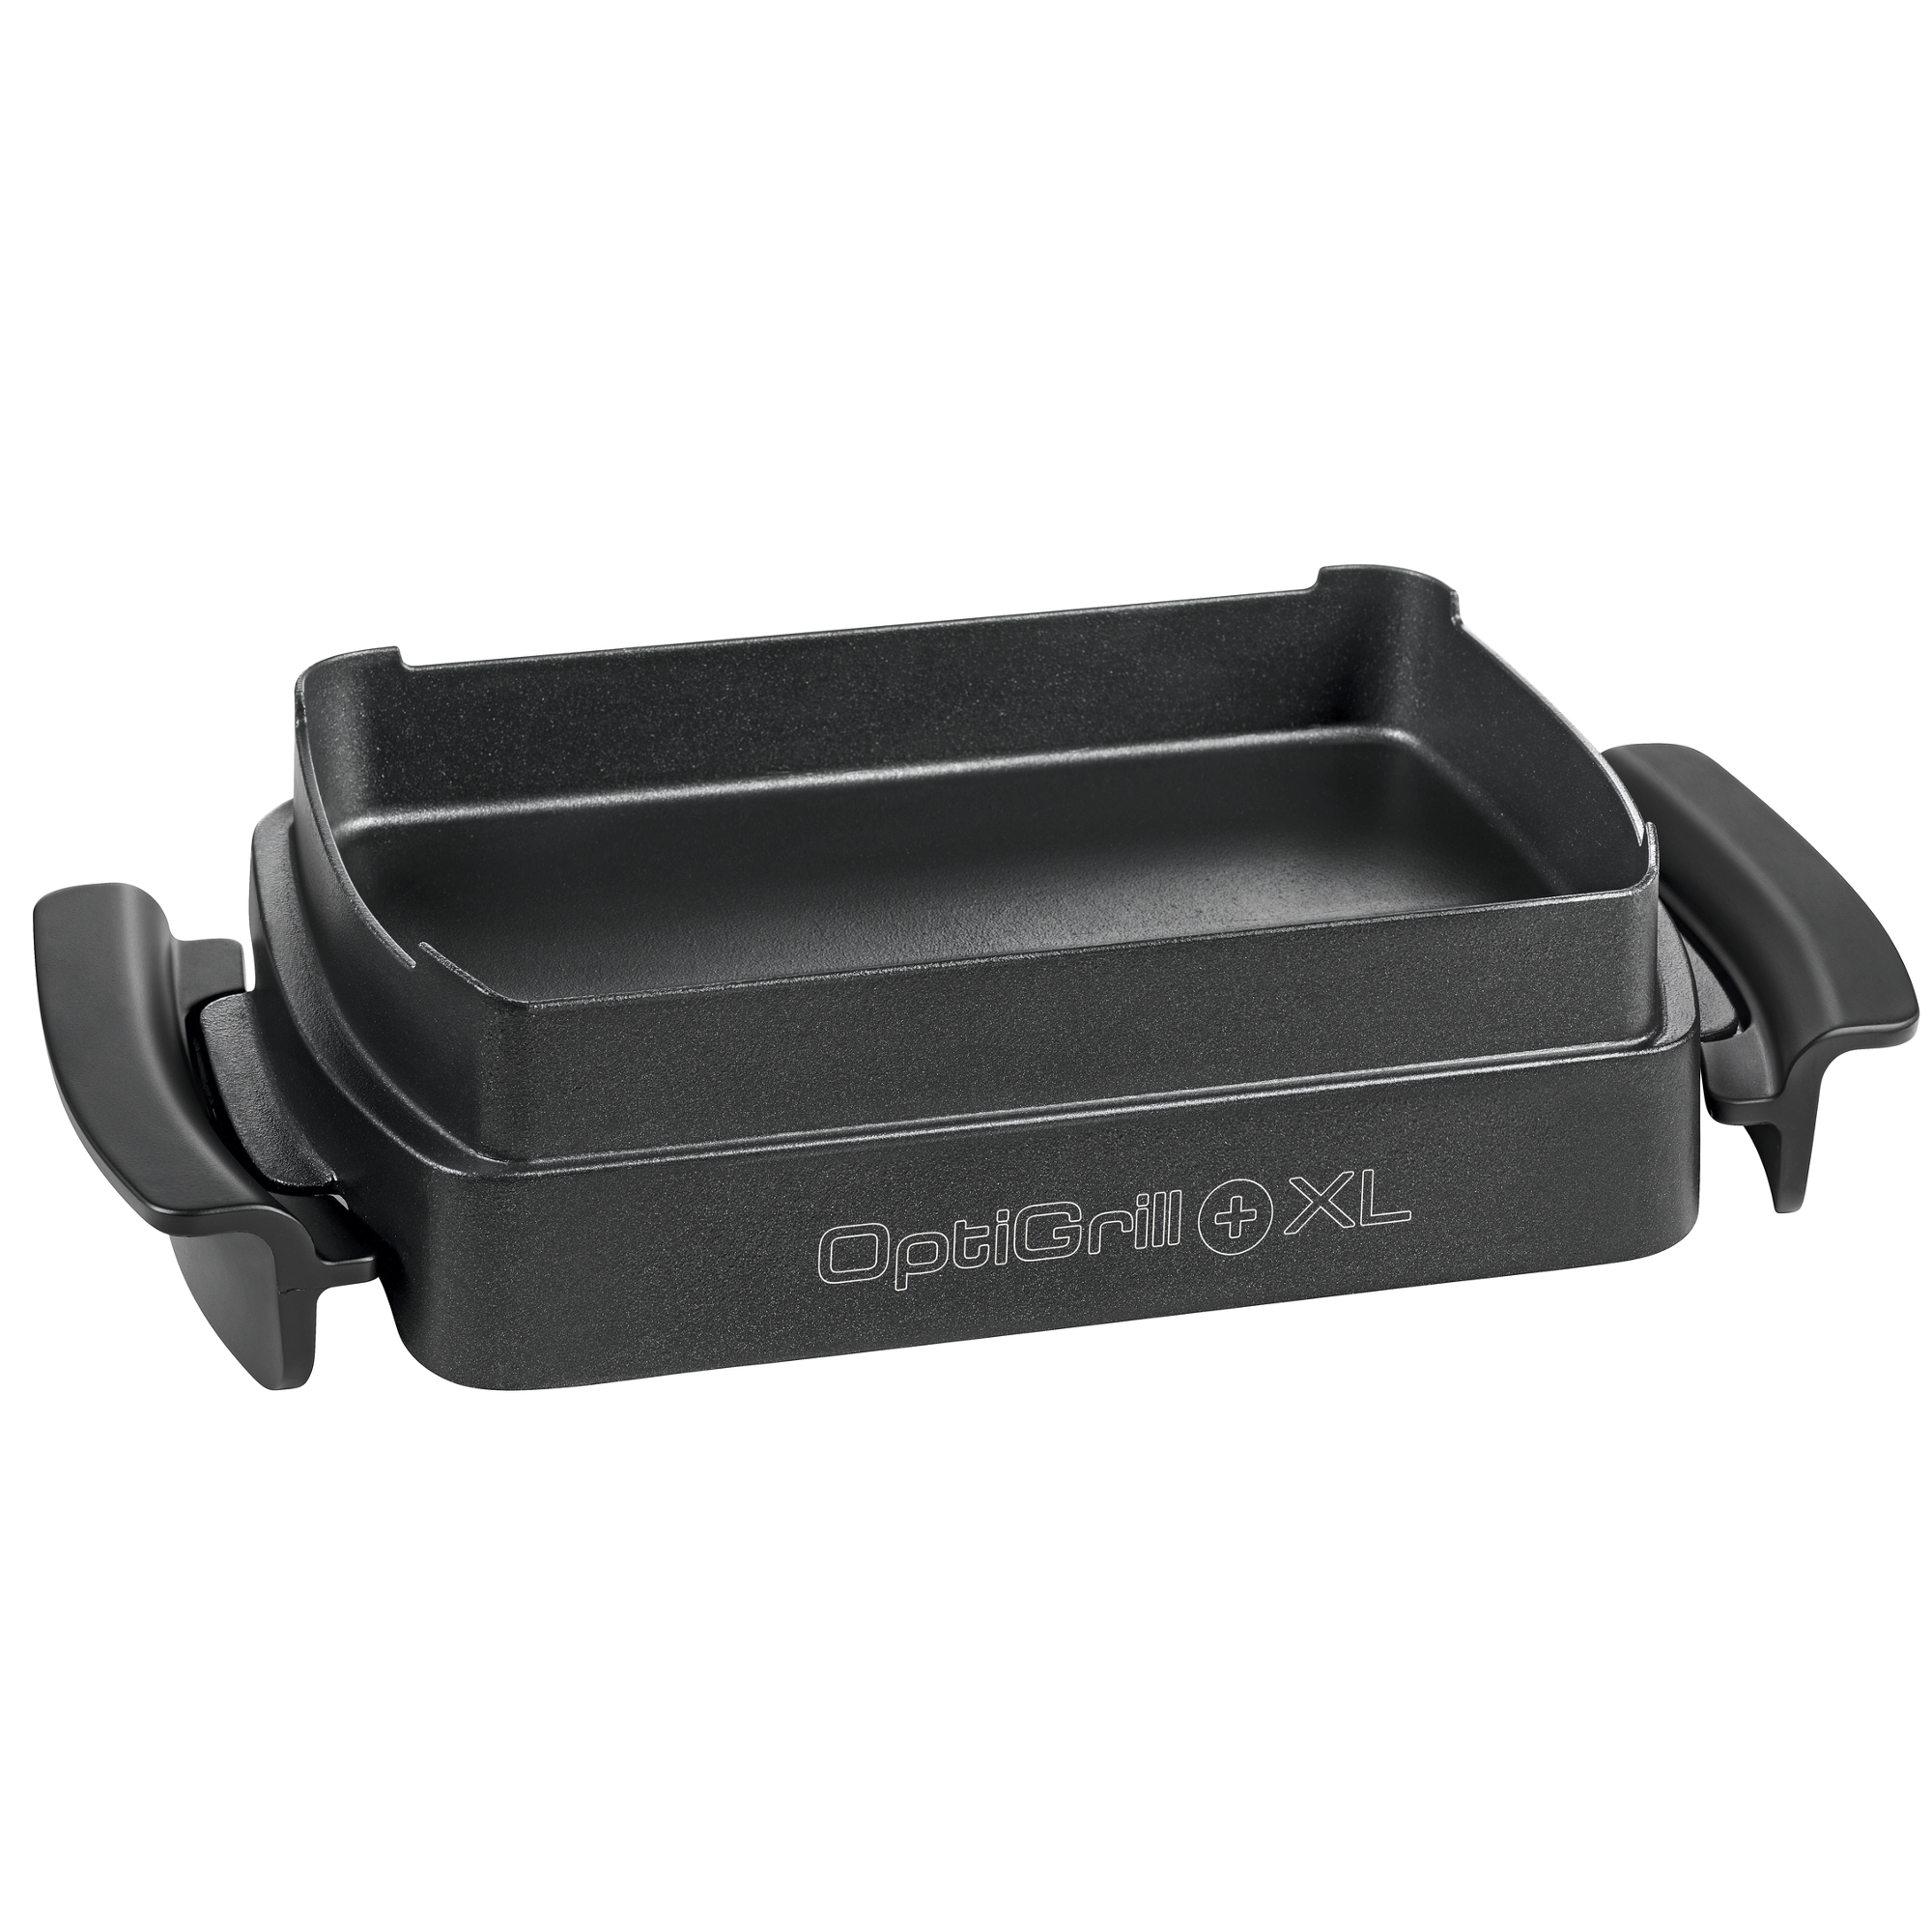 Baking accessory for OptiGrill + XL